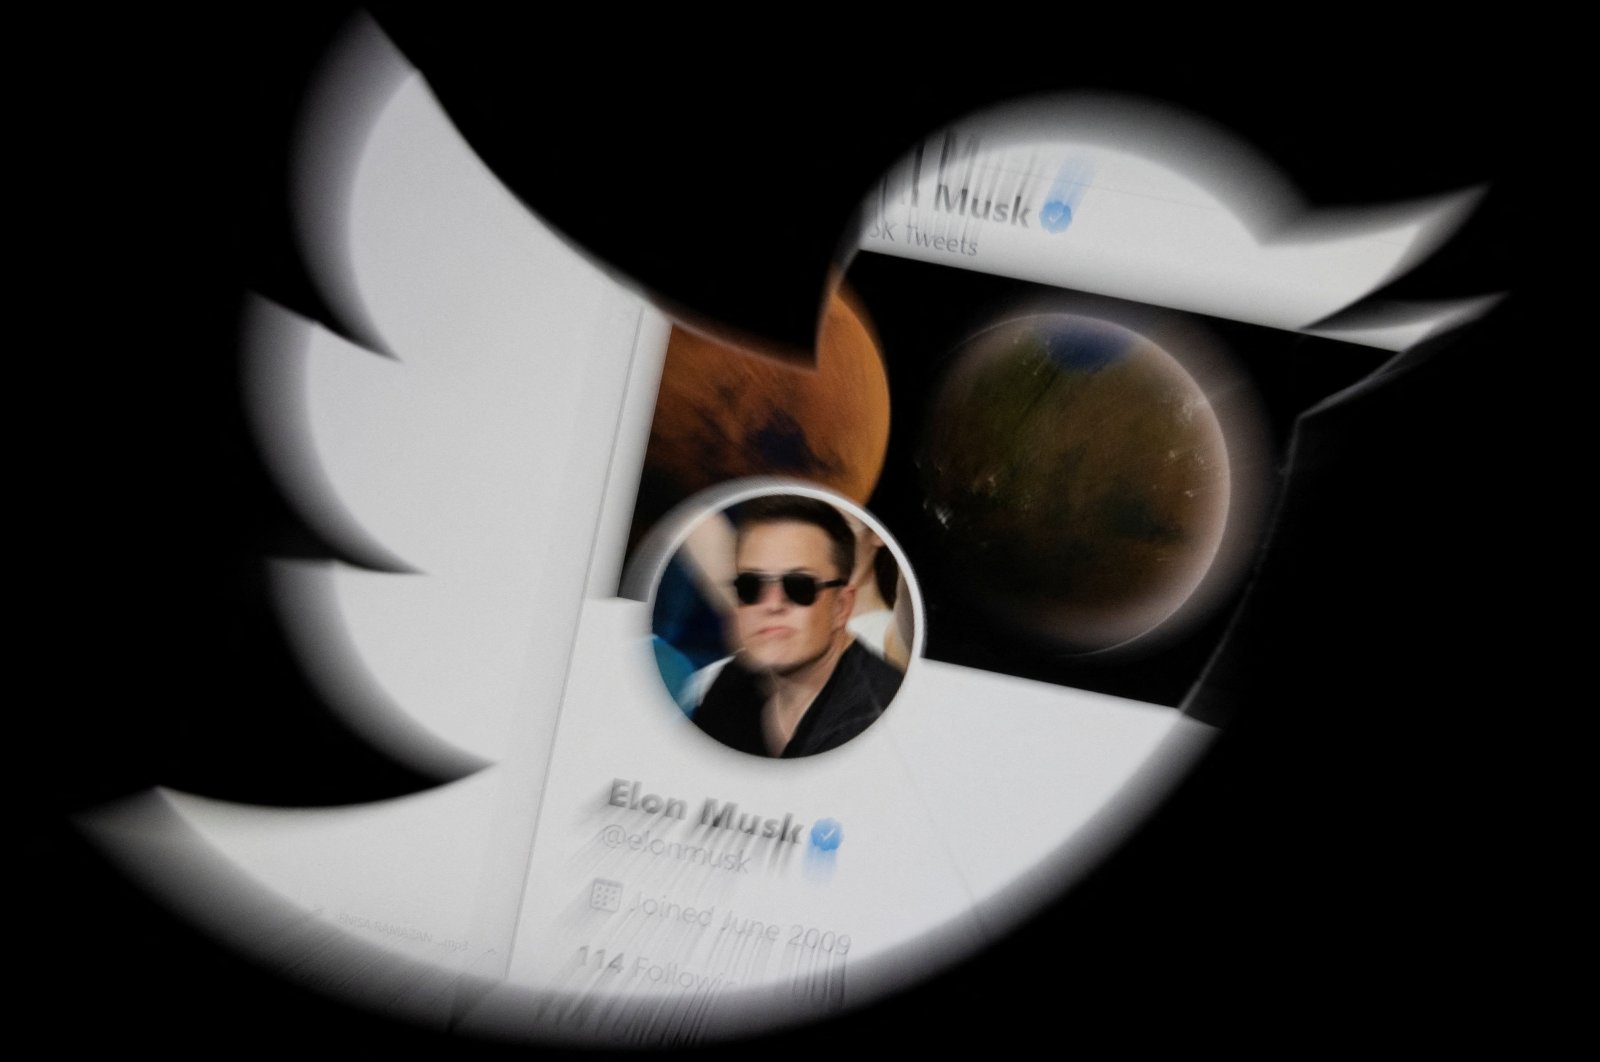 Elon Musk&#039;s Twitter account is seen through the Twitter logo in this illustration, April 25, 2022. (REUTERS Photo)